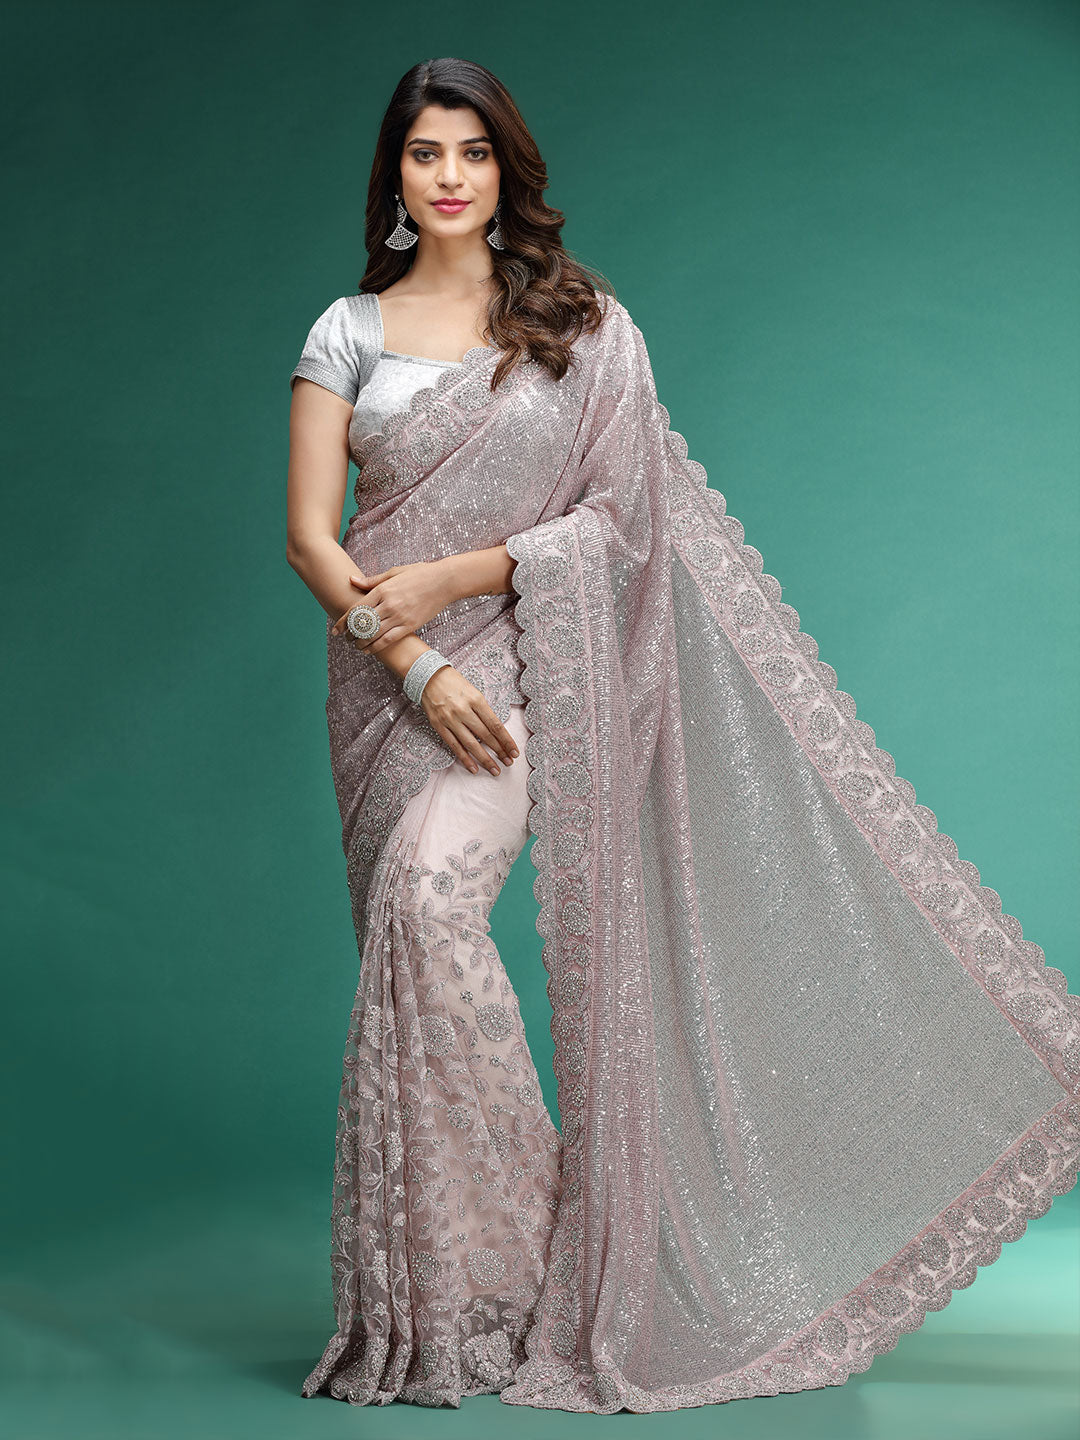 Which is the best Indian online designer sarees store? - Quora